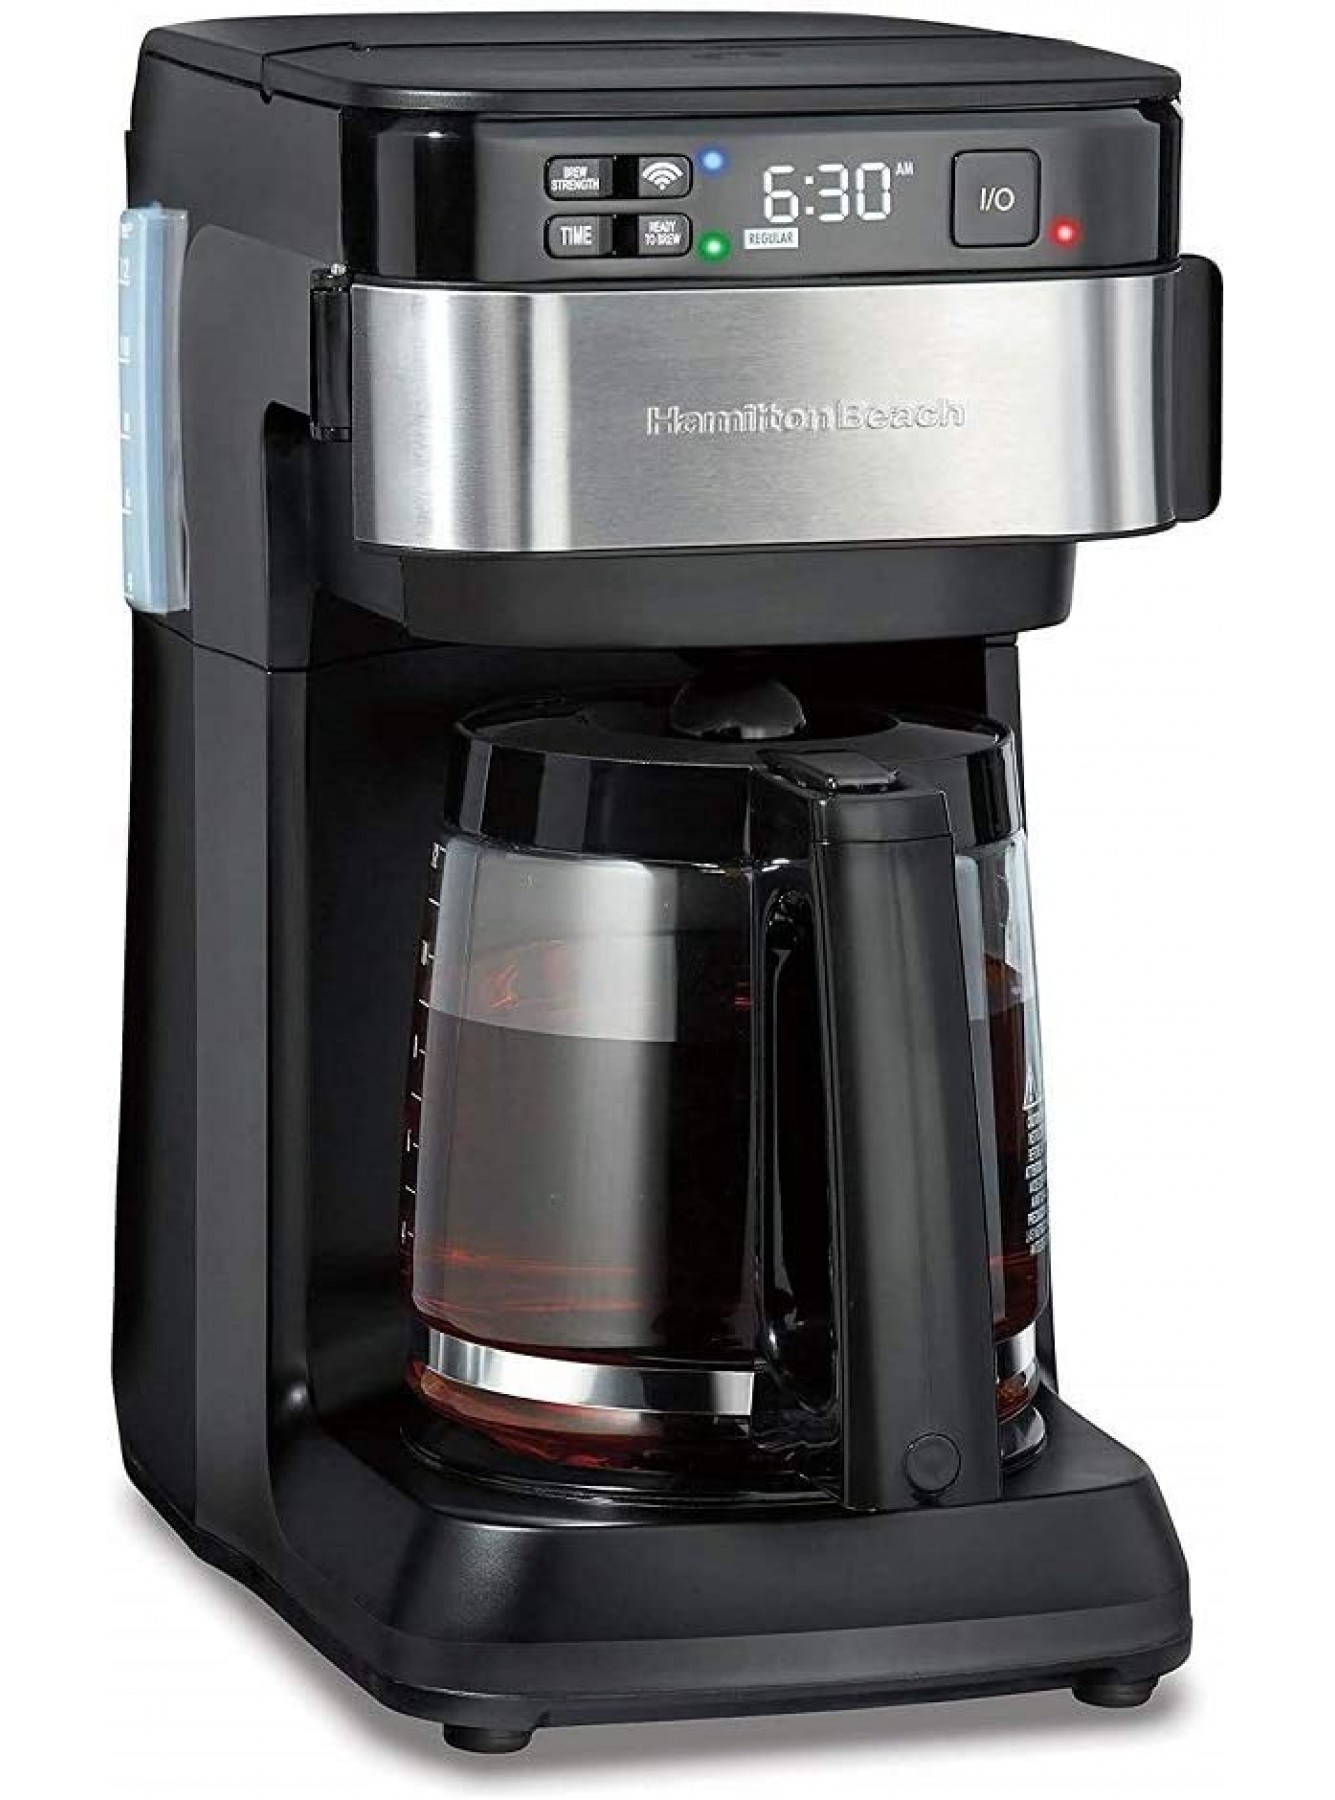 Hamilton Beach Works with Alexa Smart Coffee Maker Programmable 12 Cup Capacity Black and Stainless Steel 49350 – A Certified for Humans Device B07TFLNDNR